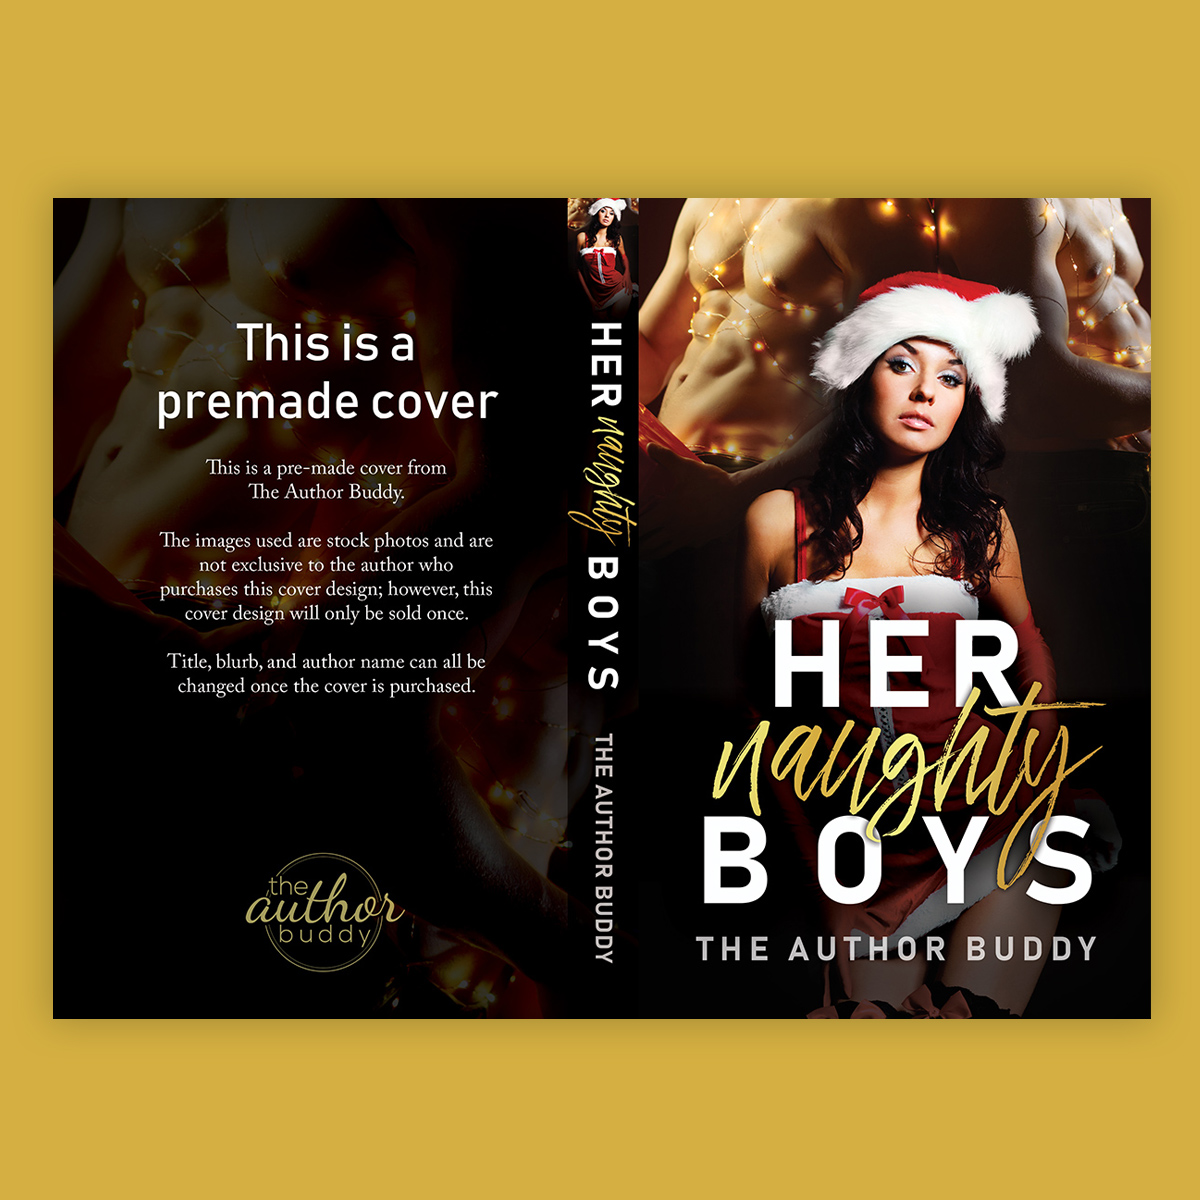 Her Naughty Boys - Premade Reverse Harem Holiday Book Cover from The Author Buddy